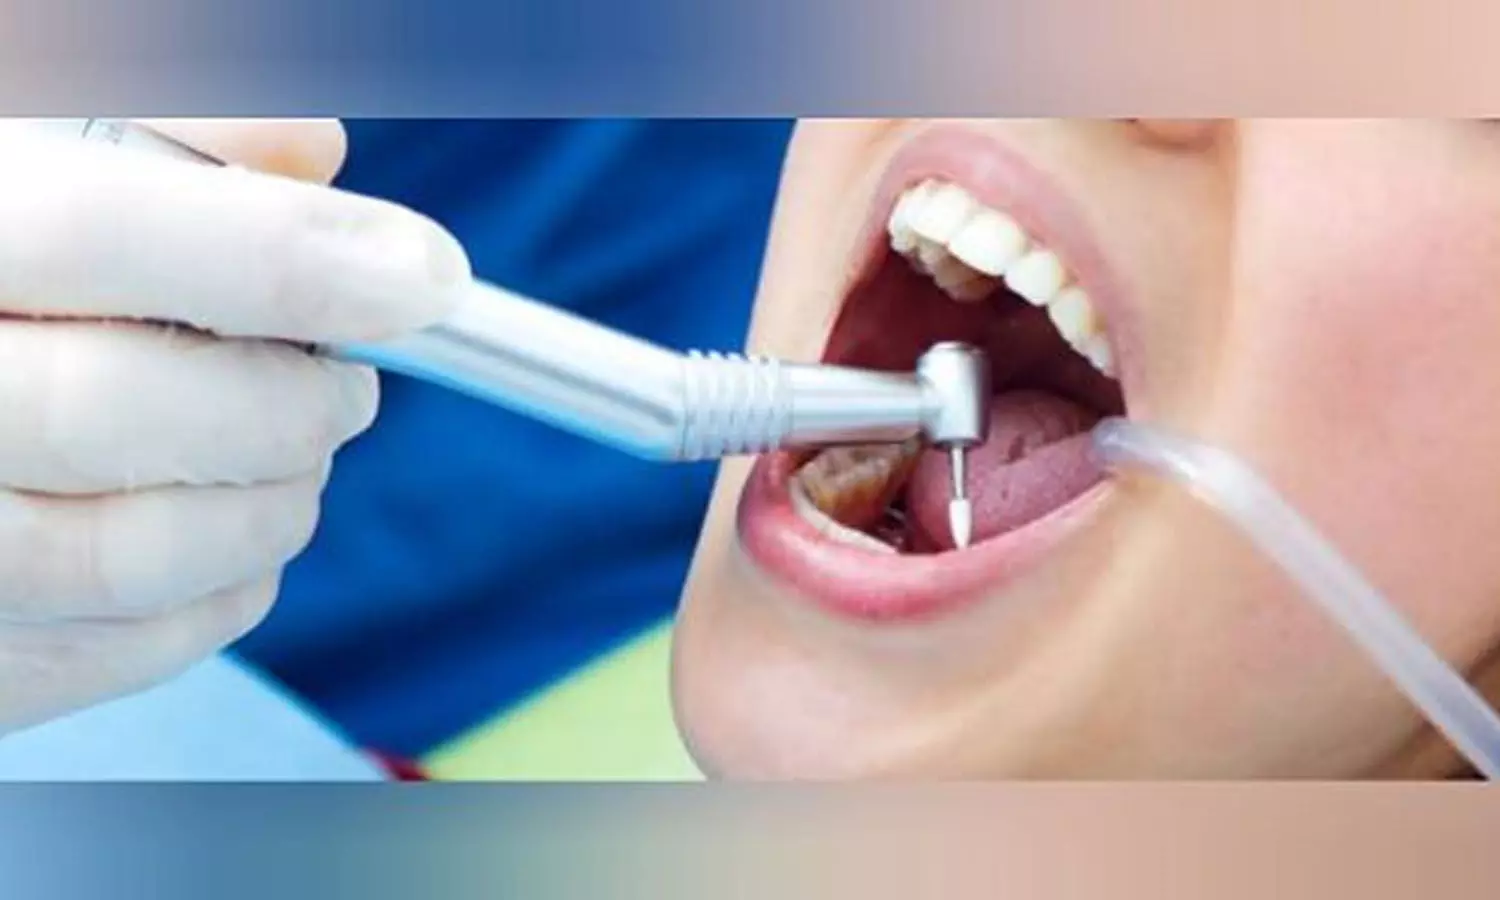 Clove Dental asked to pay Rs 2.50 lakh, interest to patients year-long agony post-root canal